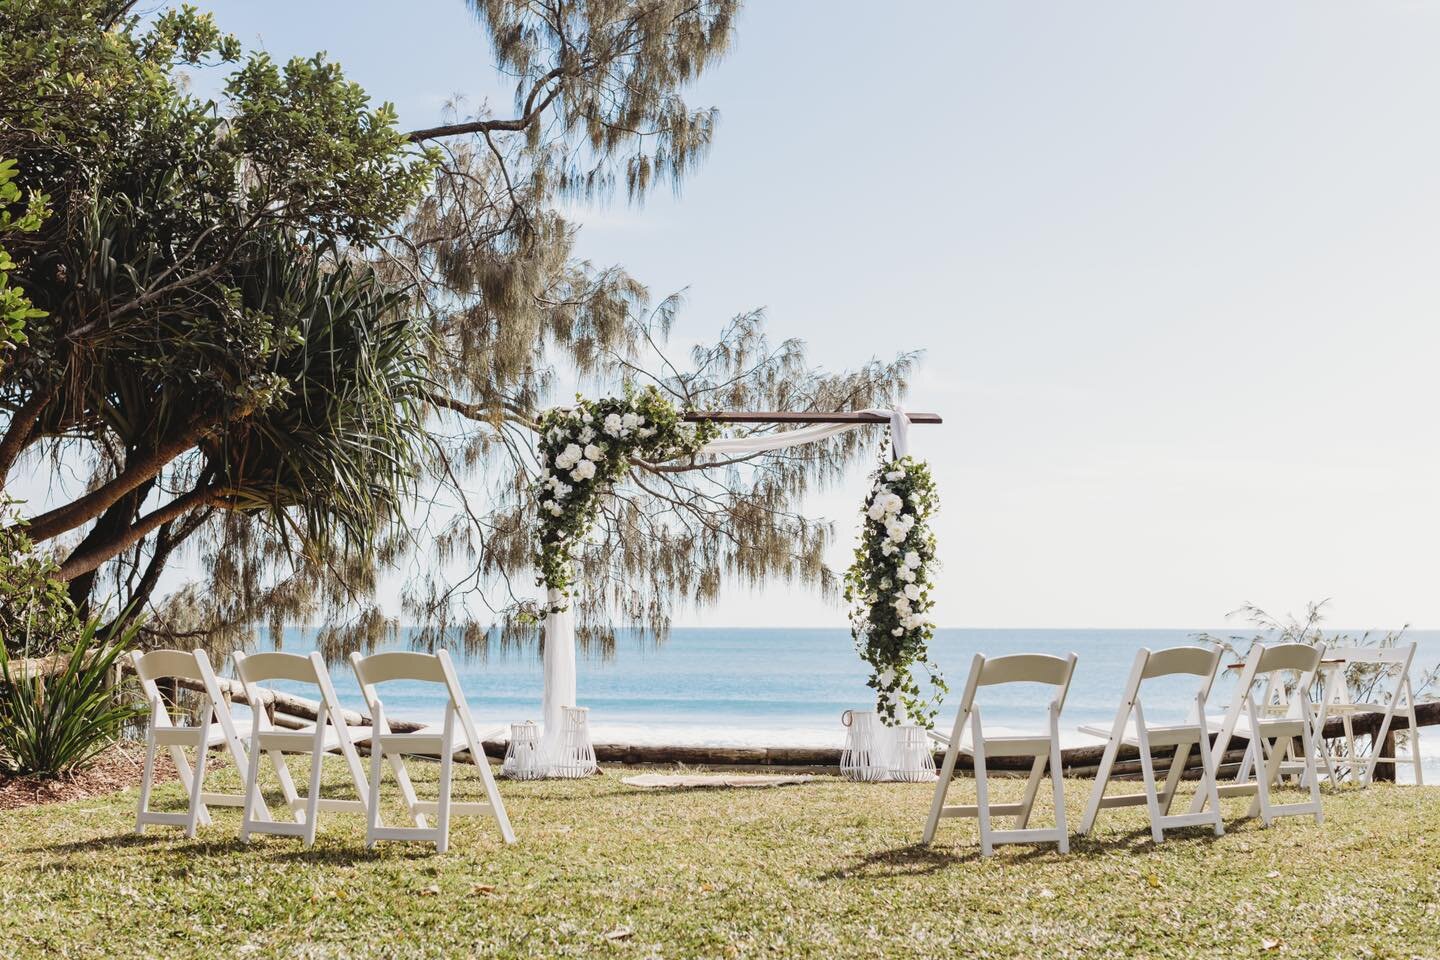 Noosa Ceremony spotlight - Casuarina Gardens

What you need to know:

✨Access #17
✨Capacity up to 60
✨Located between Maison la Plage and Hidden Grove

Looking for a natural setting for your ceremony? Casuarina Gardens is a must-consider! Embrace the